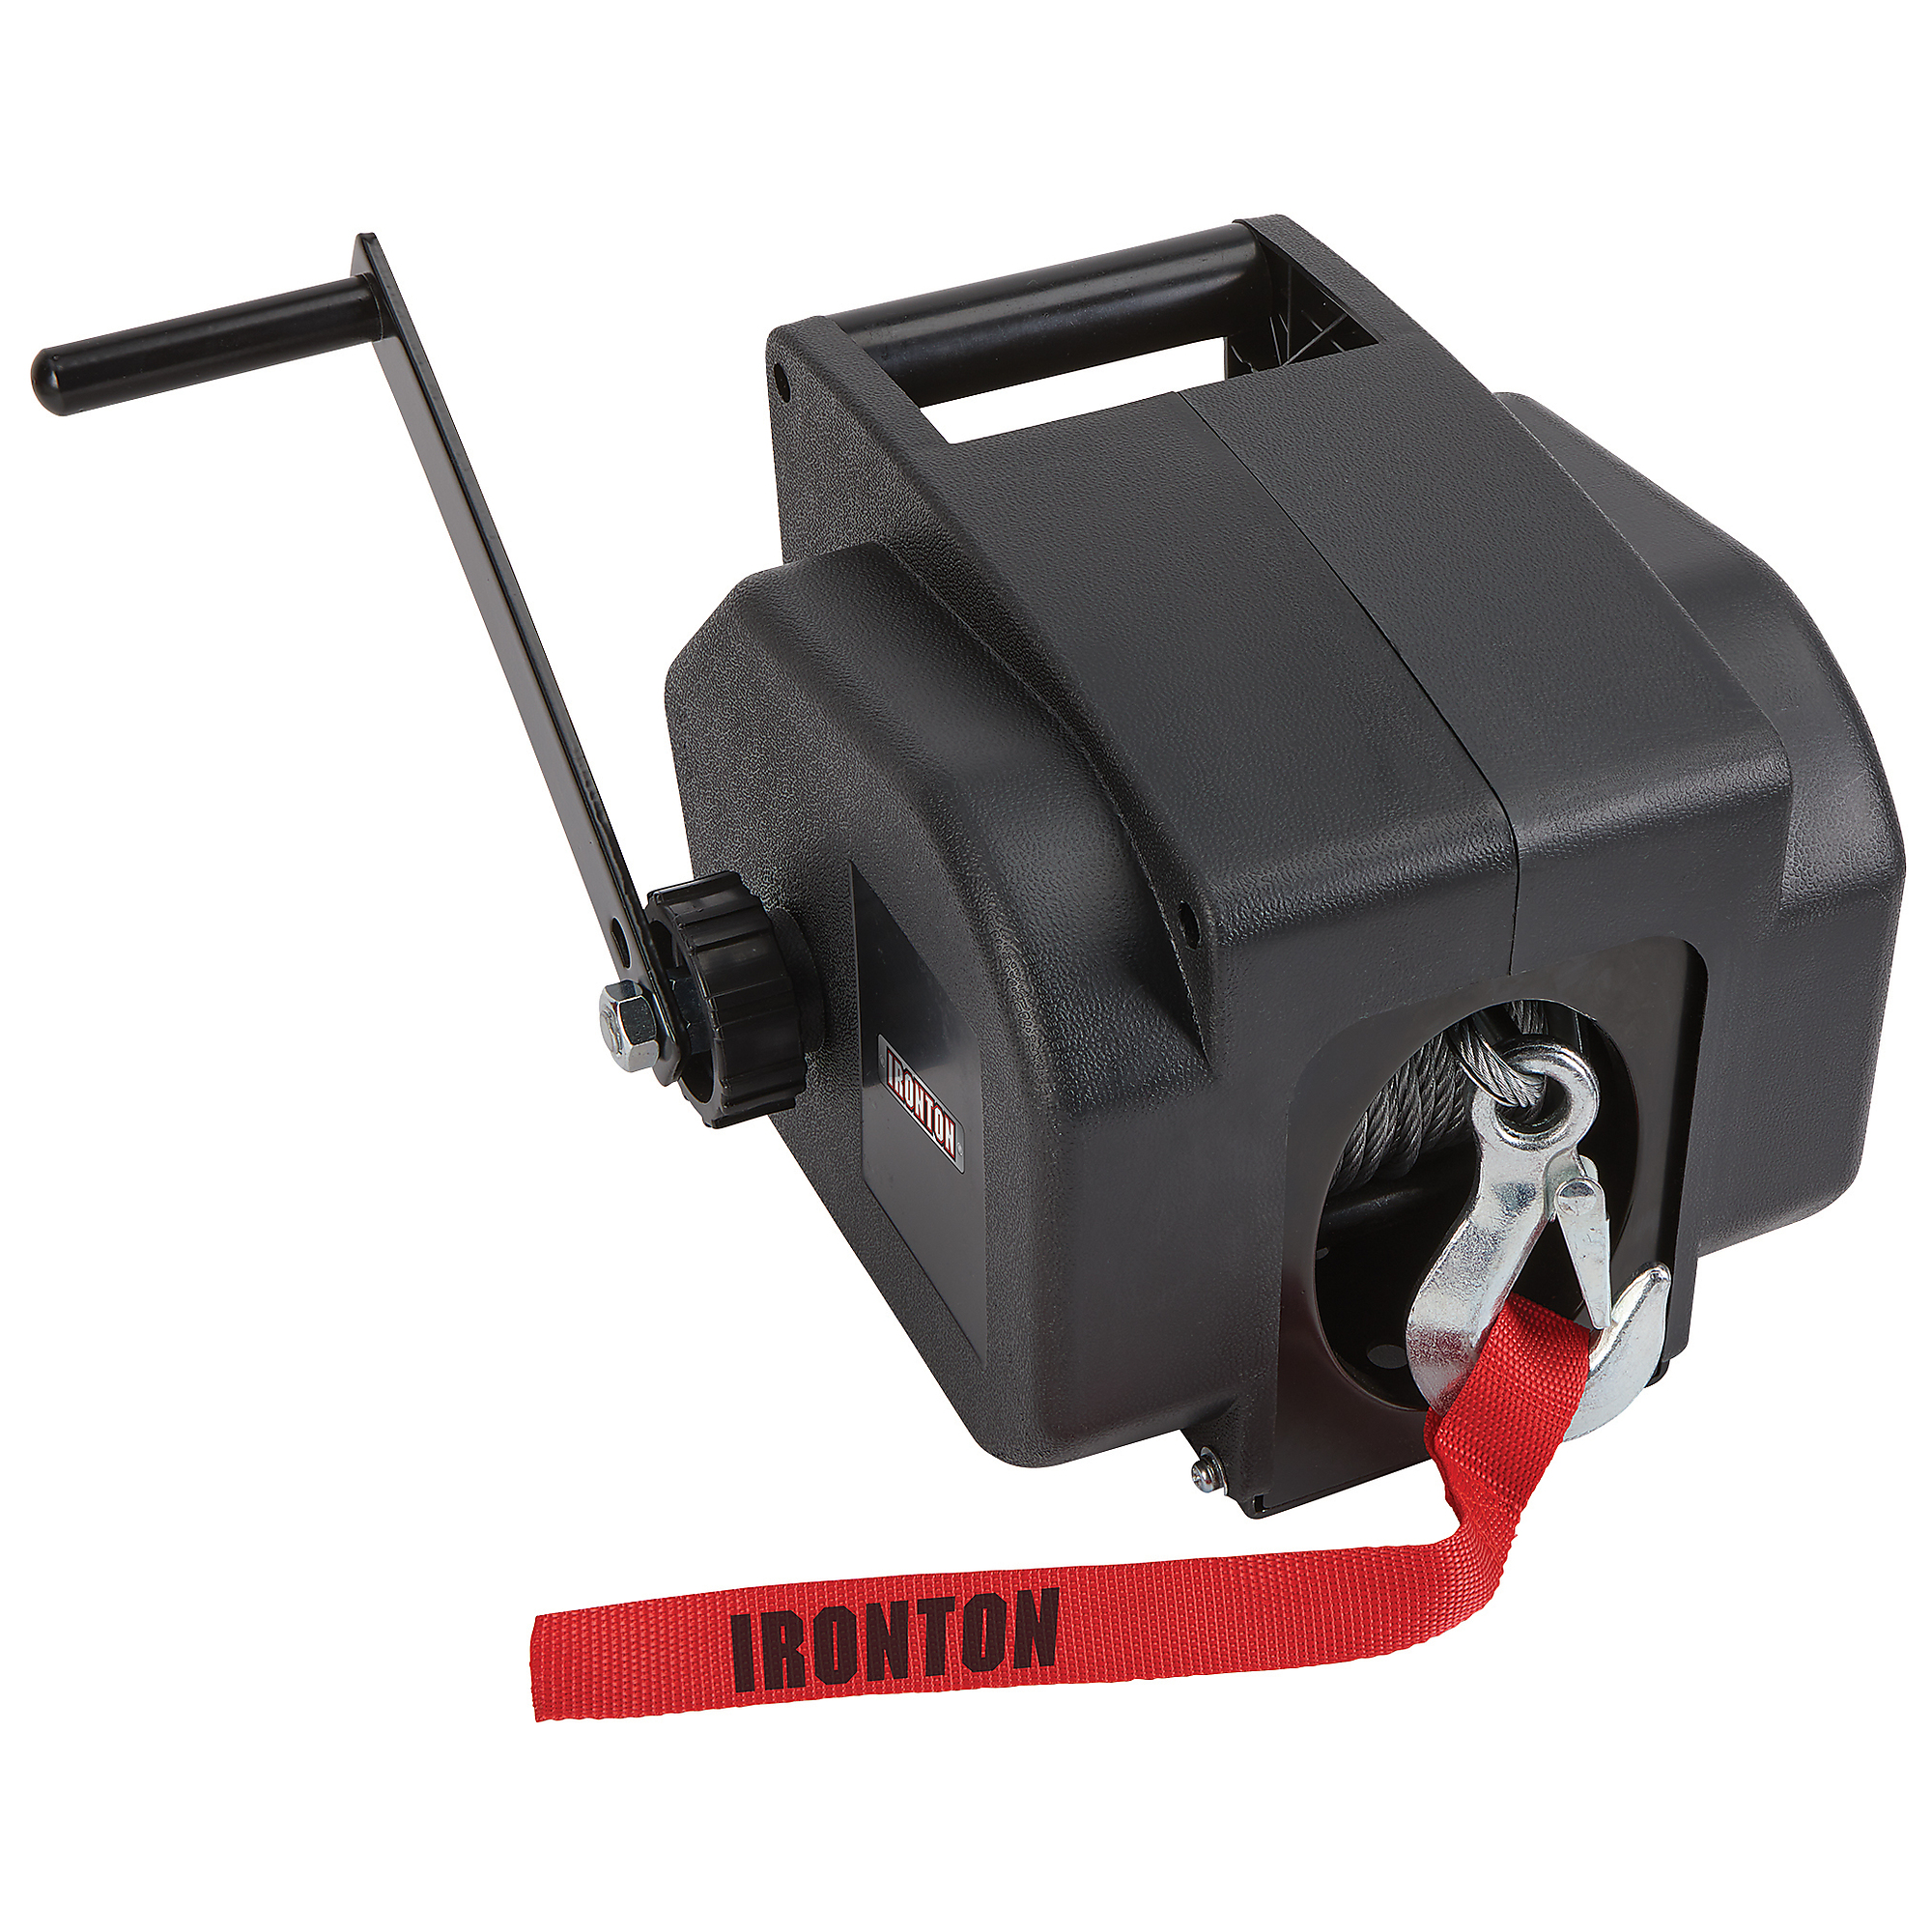 Ironton 12 Volt DC-Powered Electric Marine Winch, 2000-Lb. Capacity, Steel Wire Rope